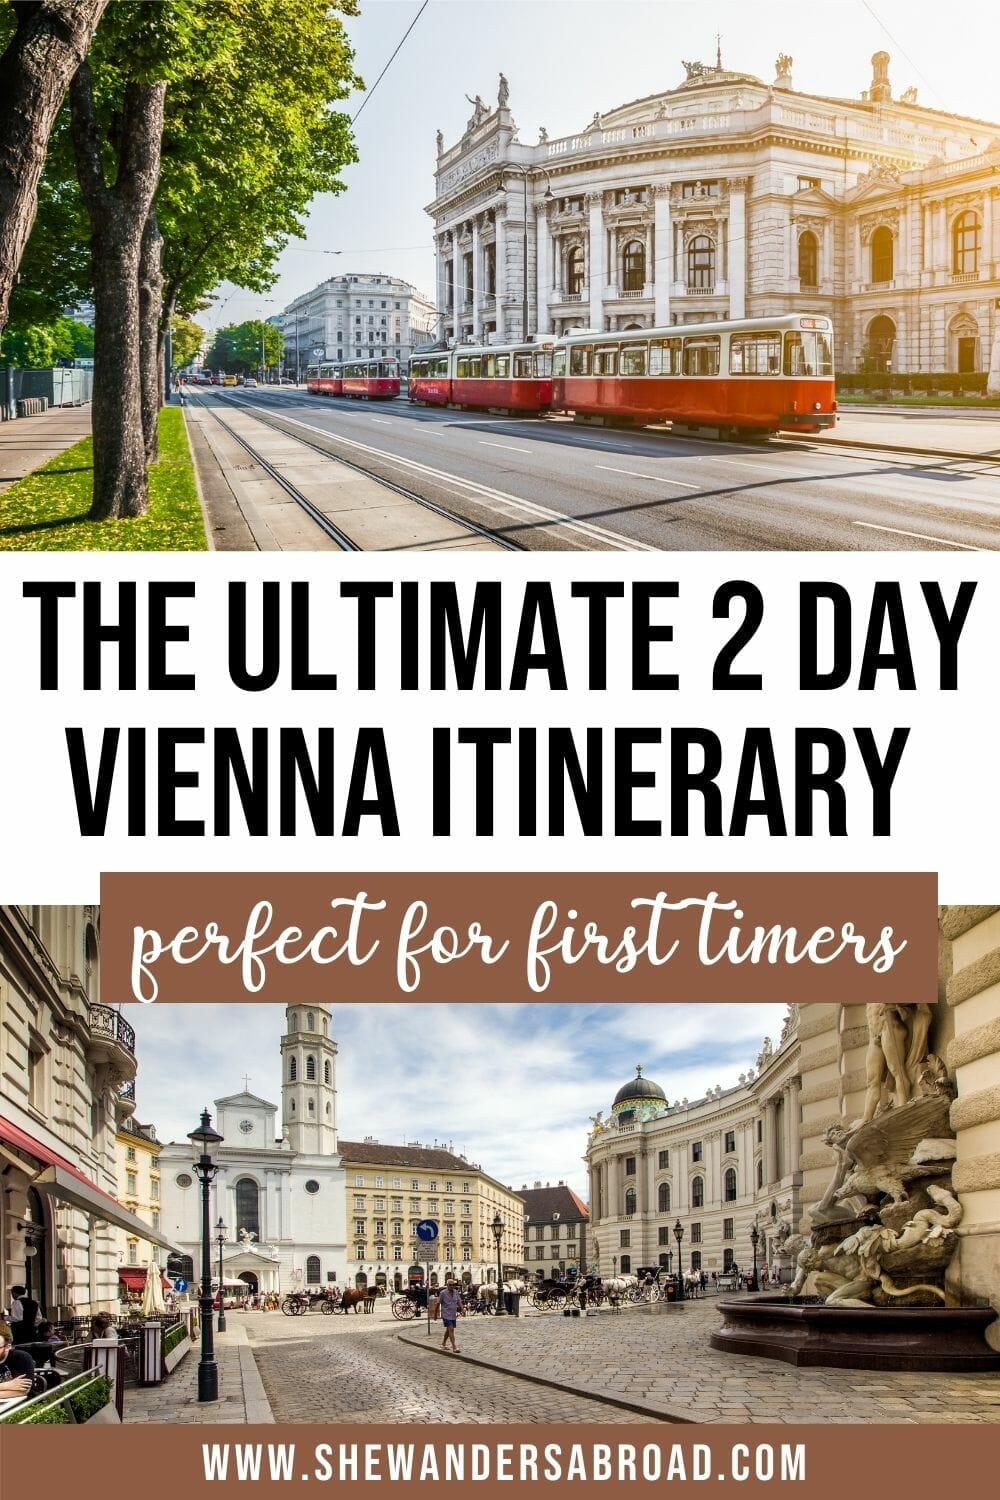 2 Days in Vienna Itinerary: The Perfect Weekend in Vienna